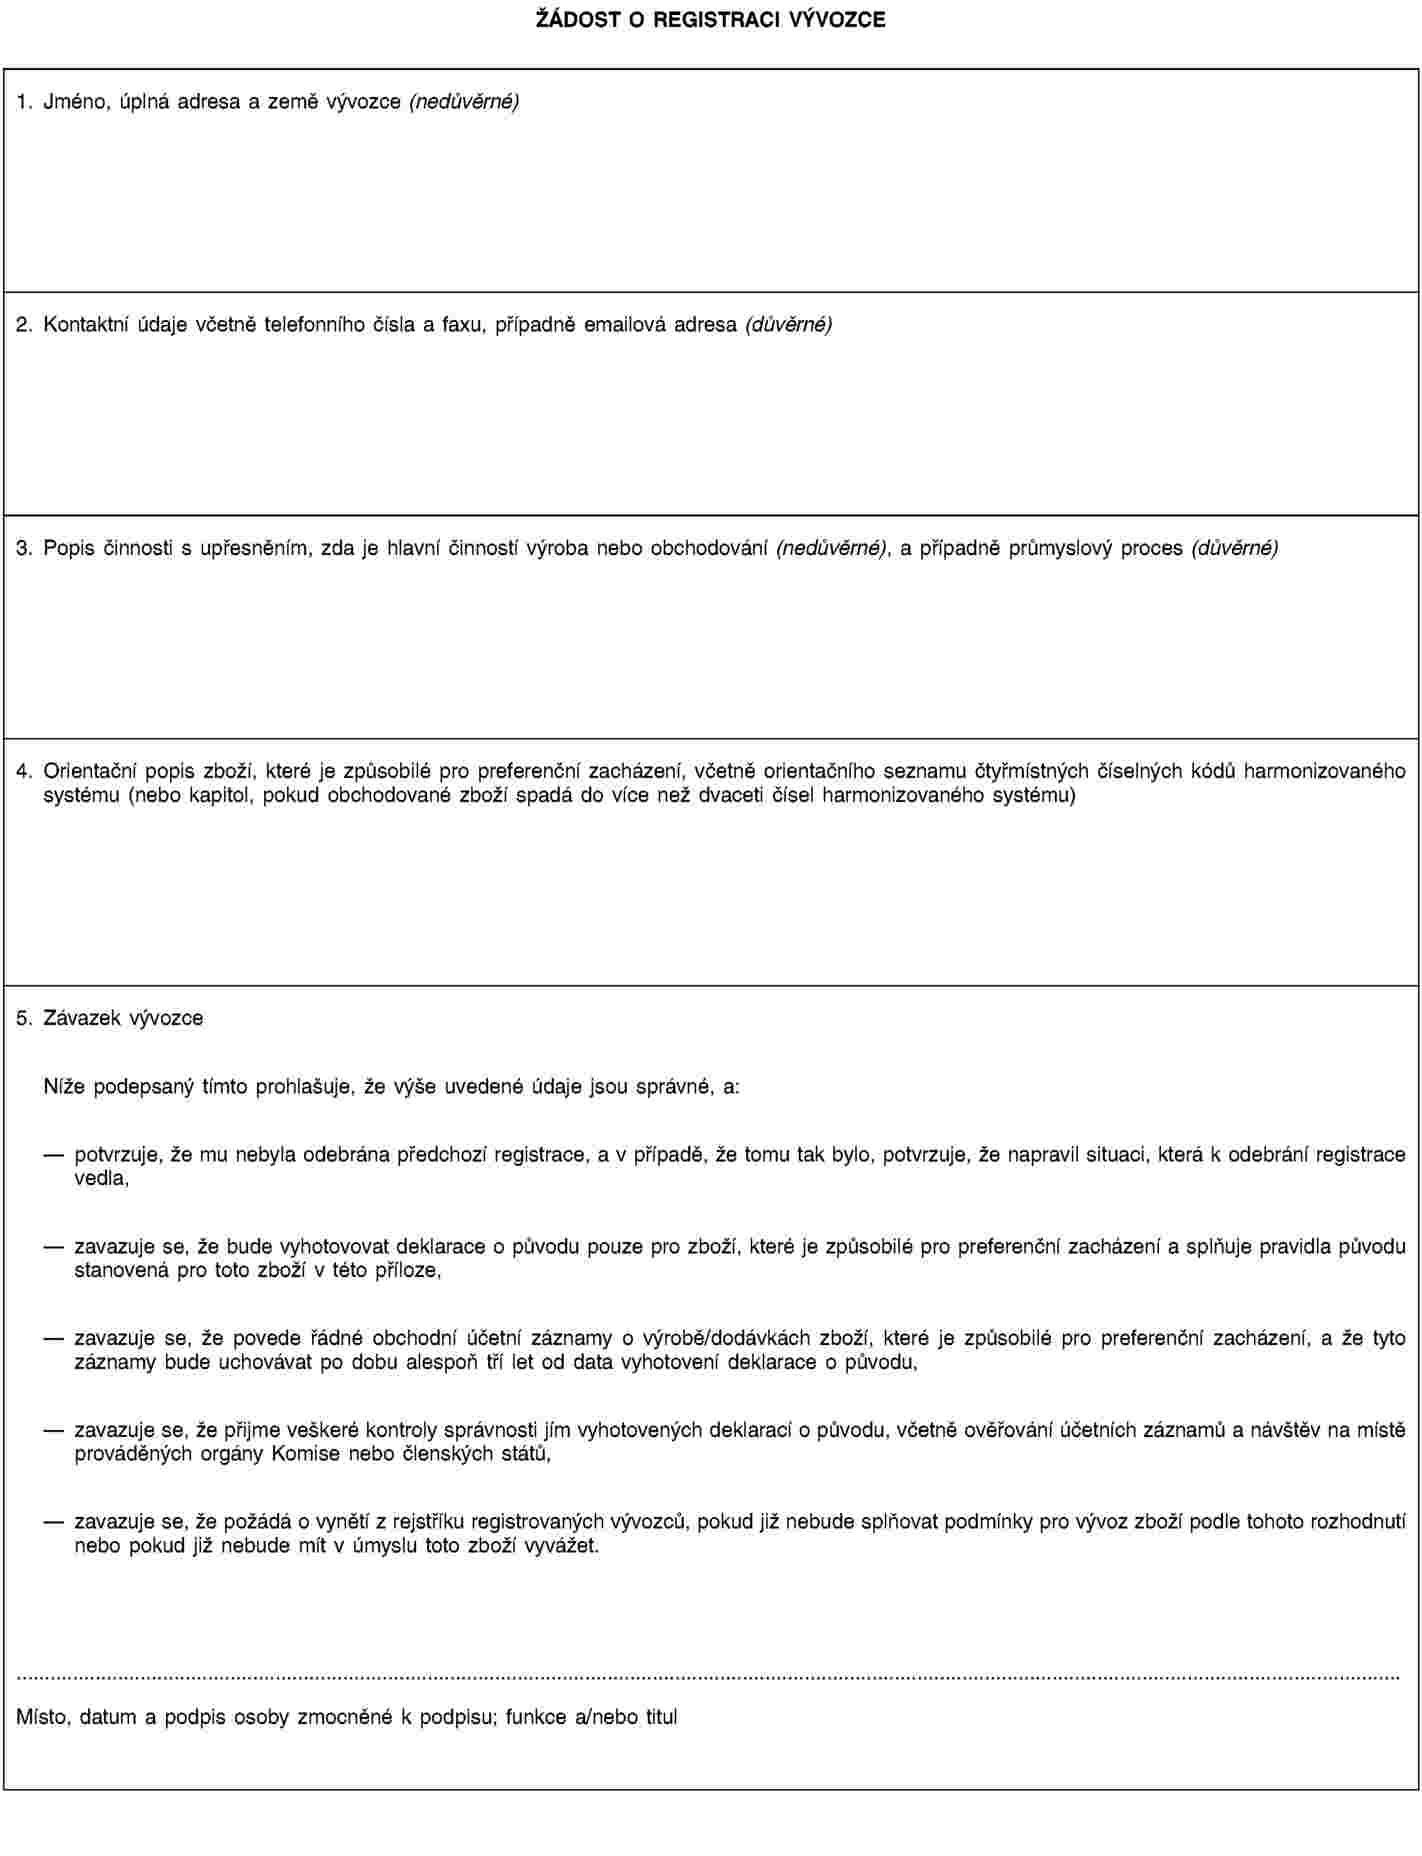 Post Acute Withdral Syndrome Worksheet